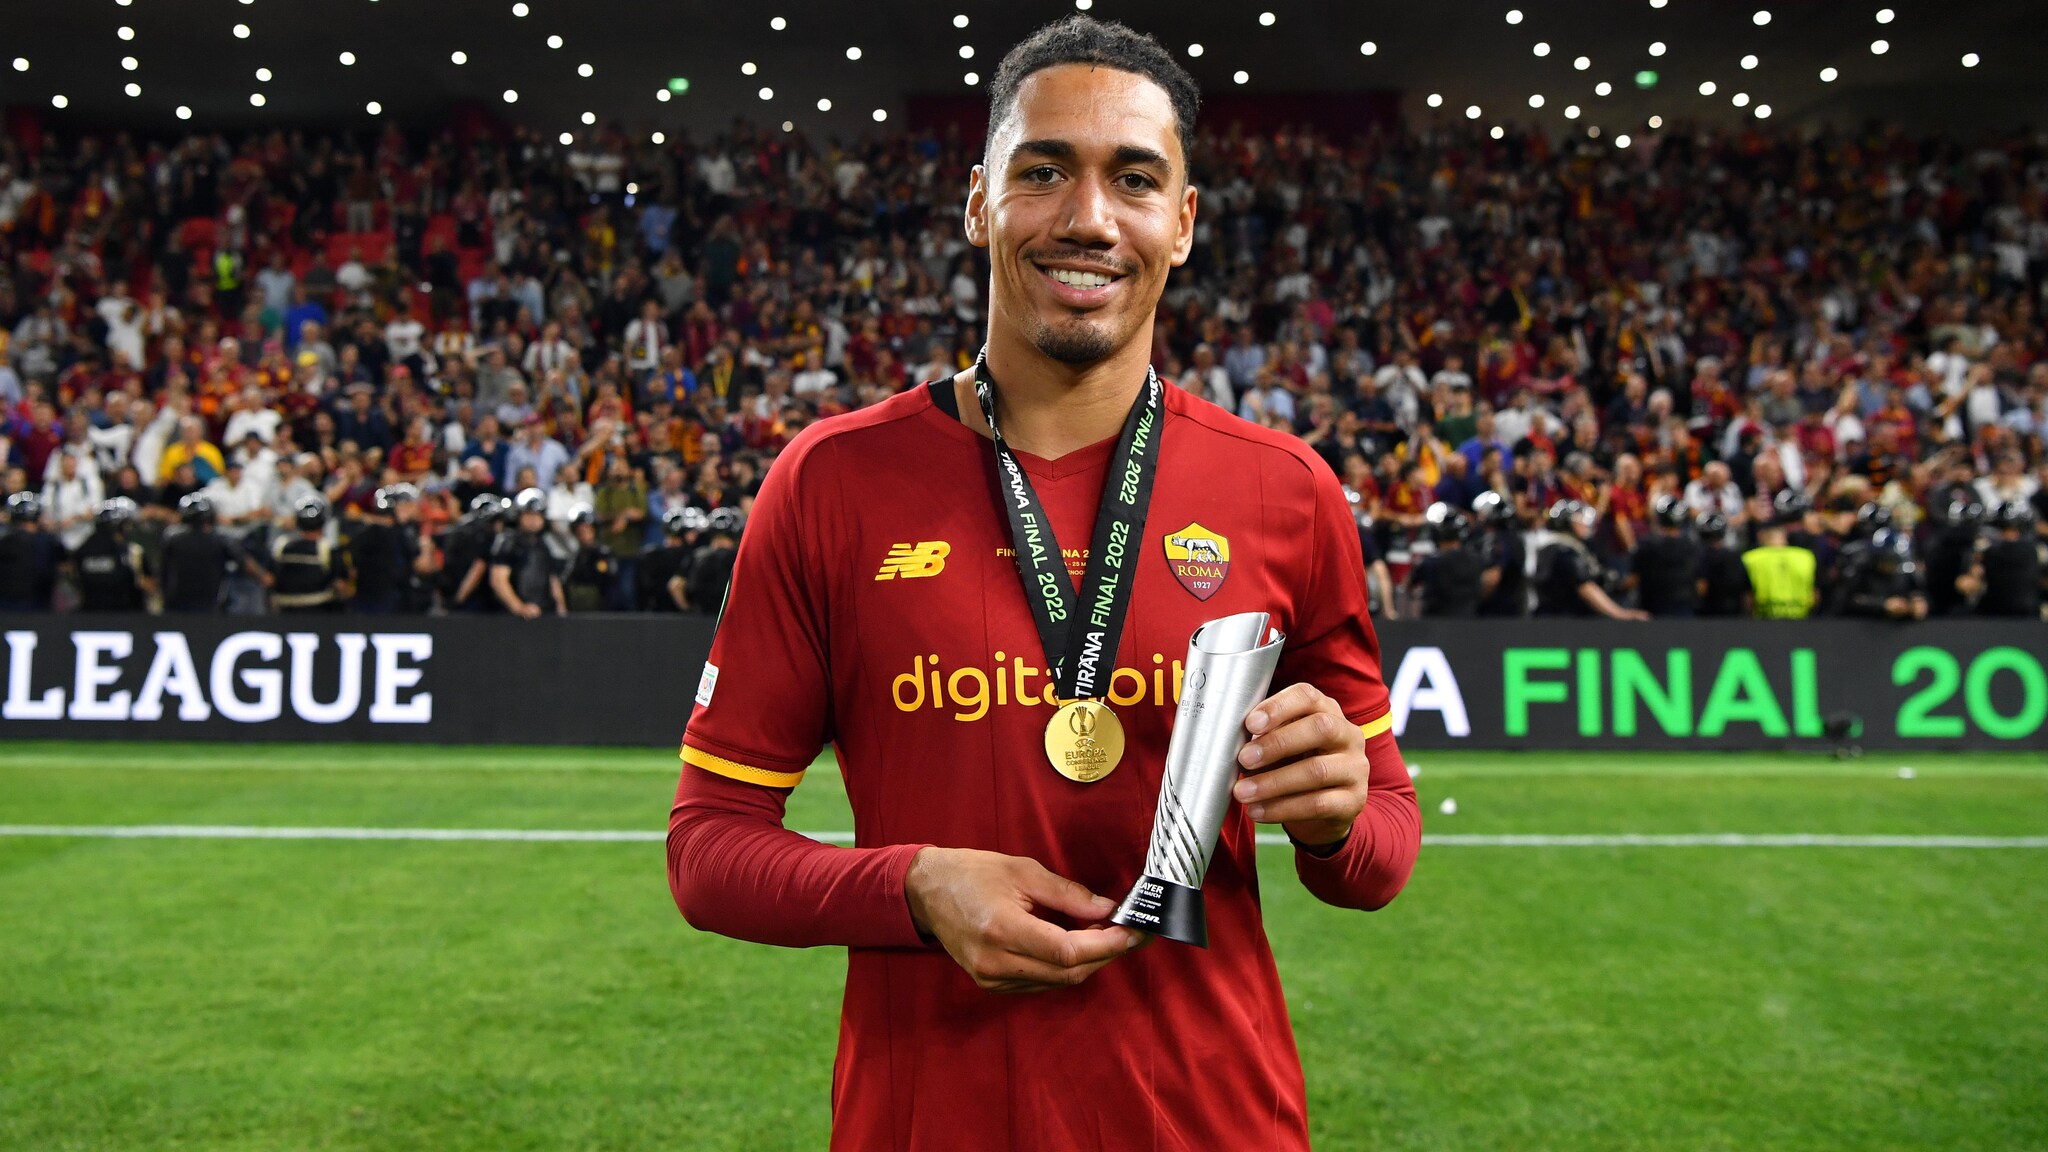 Chris Smalling named official UEFA Europa Conference League final Laufenn  Player of the Match | UEFA Europa Conference League | UEFA.com